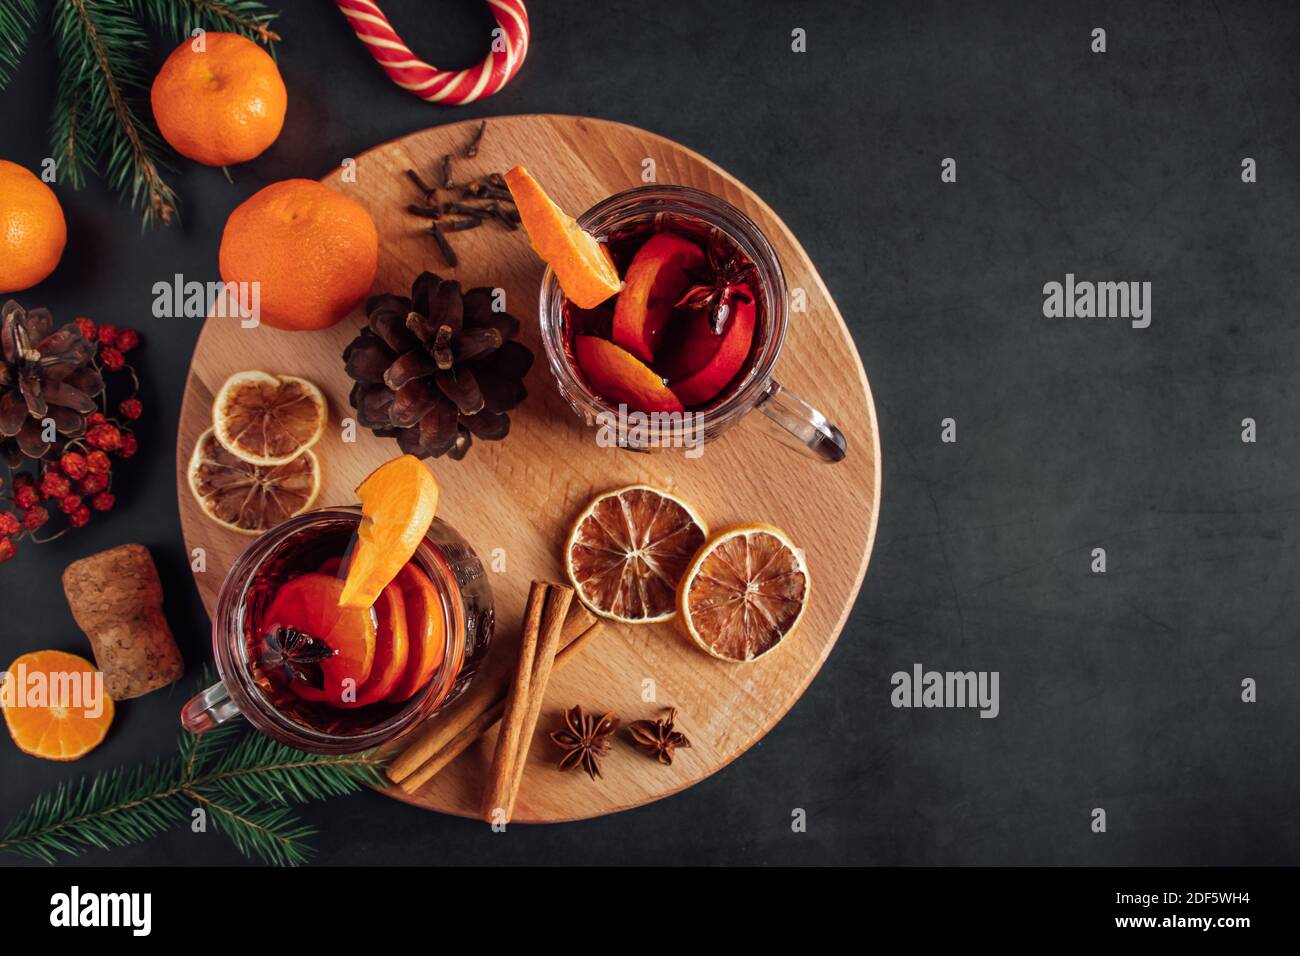 Hot mulled wine in glass cup. Warm winter drink with spices and fruits. Stock Photo